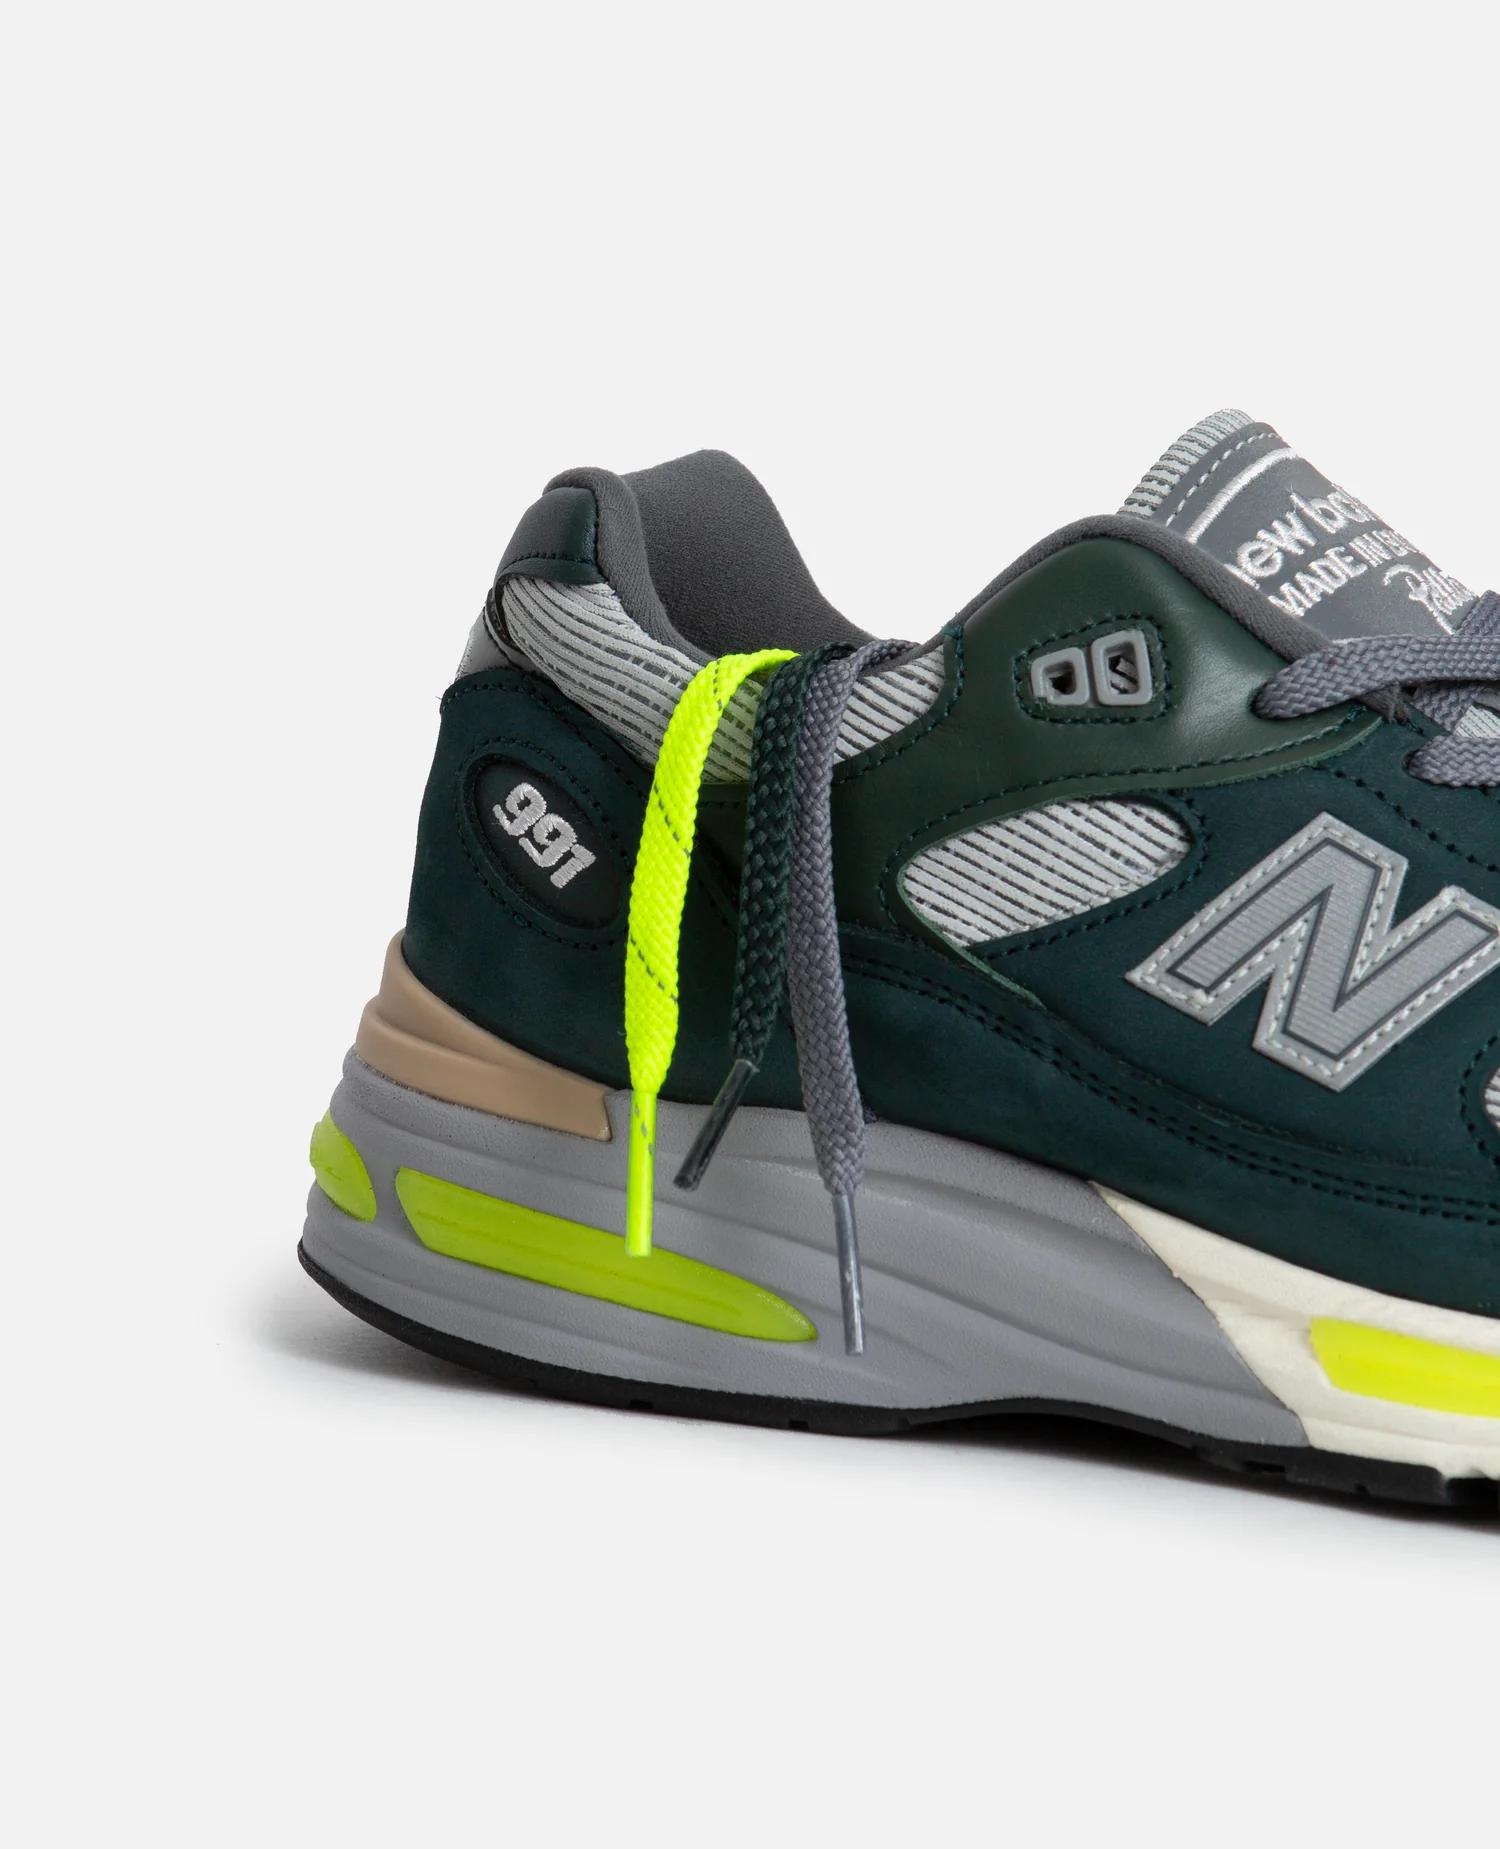 The Patta x New Balance 991v2 Collection Drops in December 